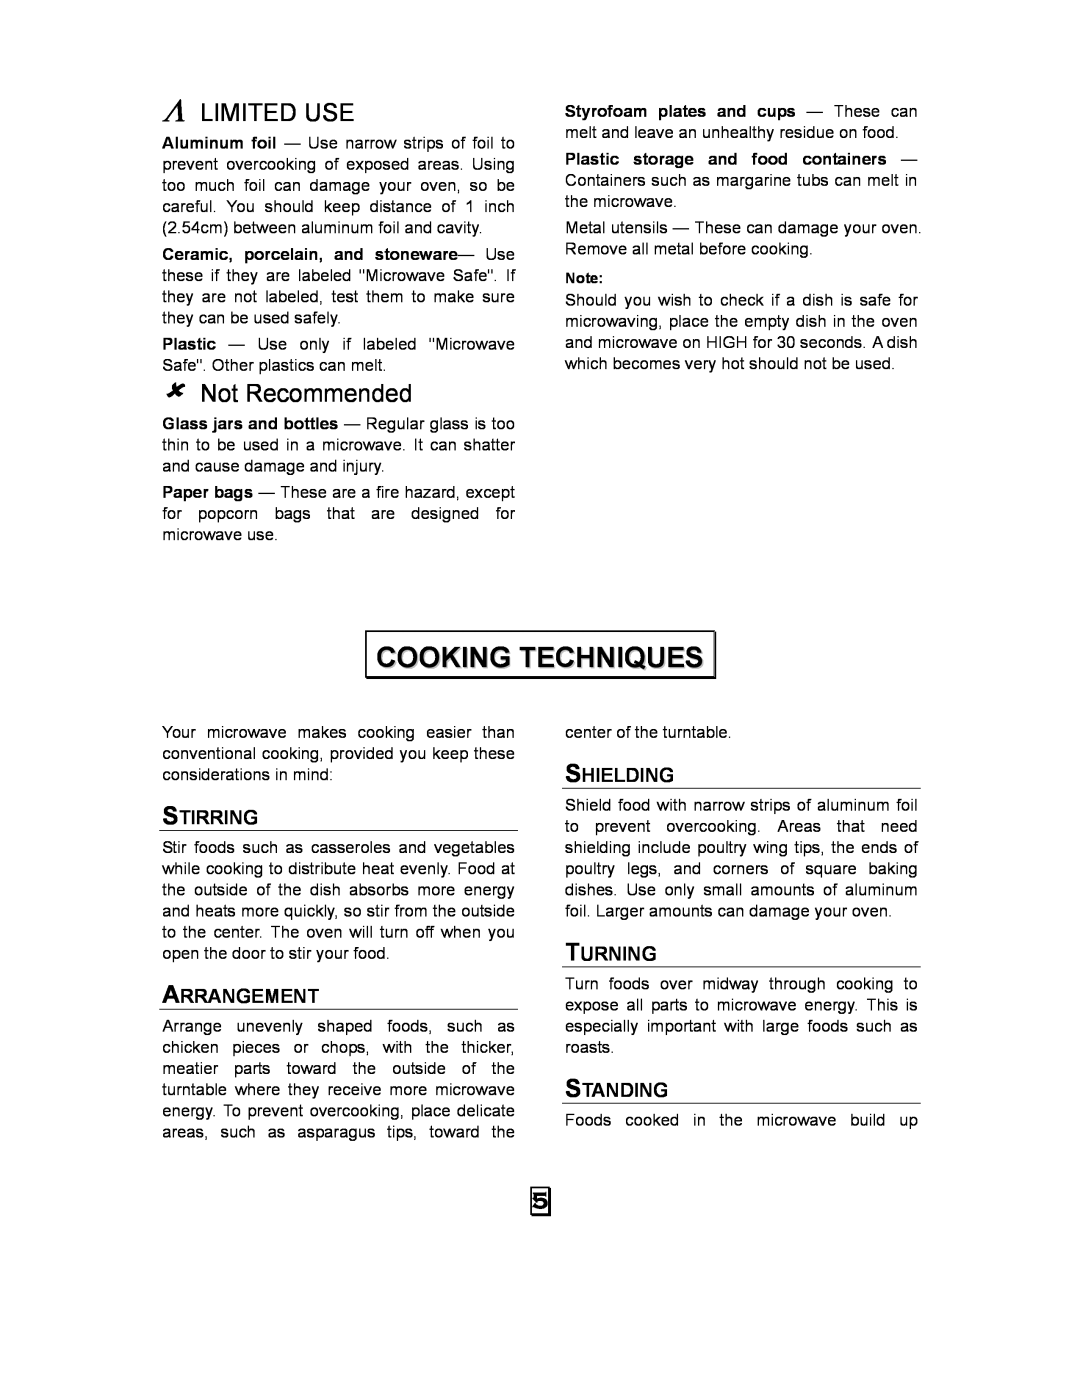 RCA RMW968 manual Cooking Techniques, Λ Limited Use, Not Recommended, Stirring, Arrangement, Shielding, Turning, Standing 